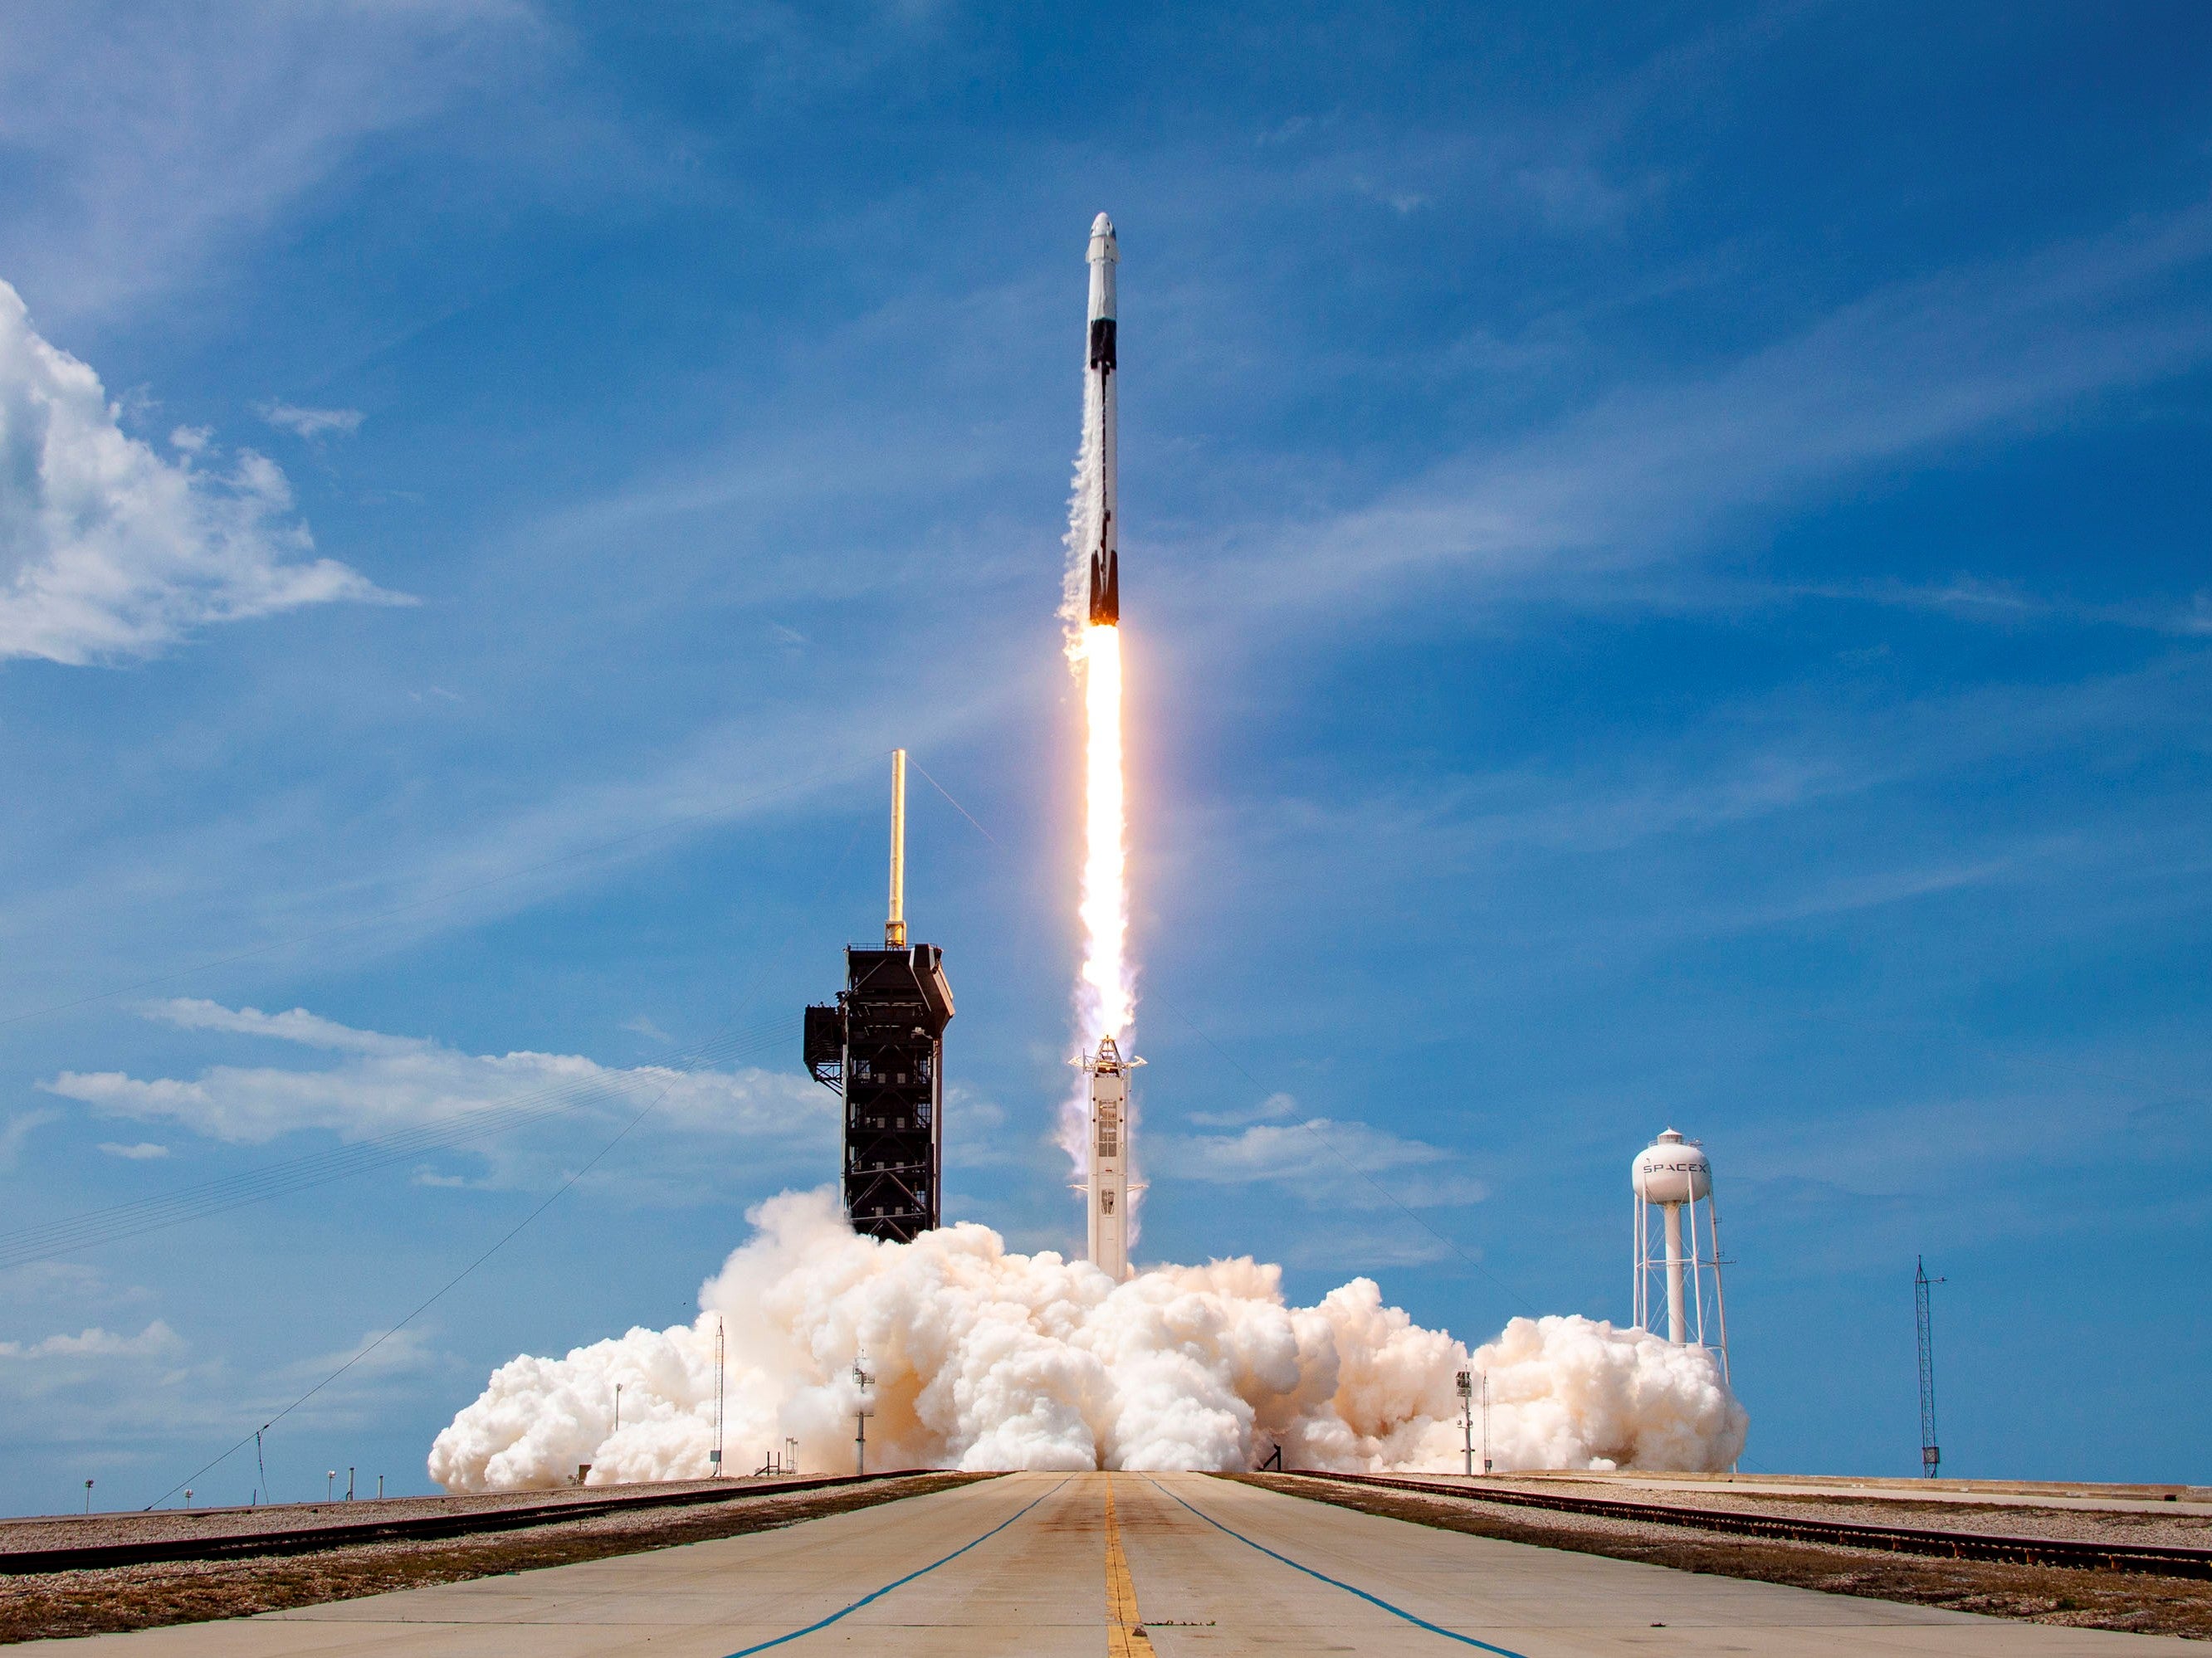 A SpaceX Falcon 9 rocket carrying the Crew Dragon spacecraft launches from Cape Canaveral, Florida on 30 May, 2020